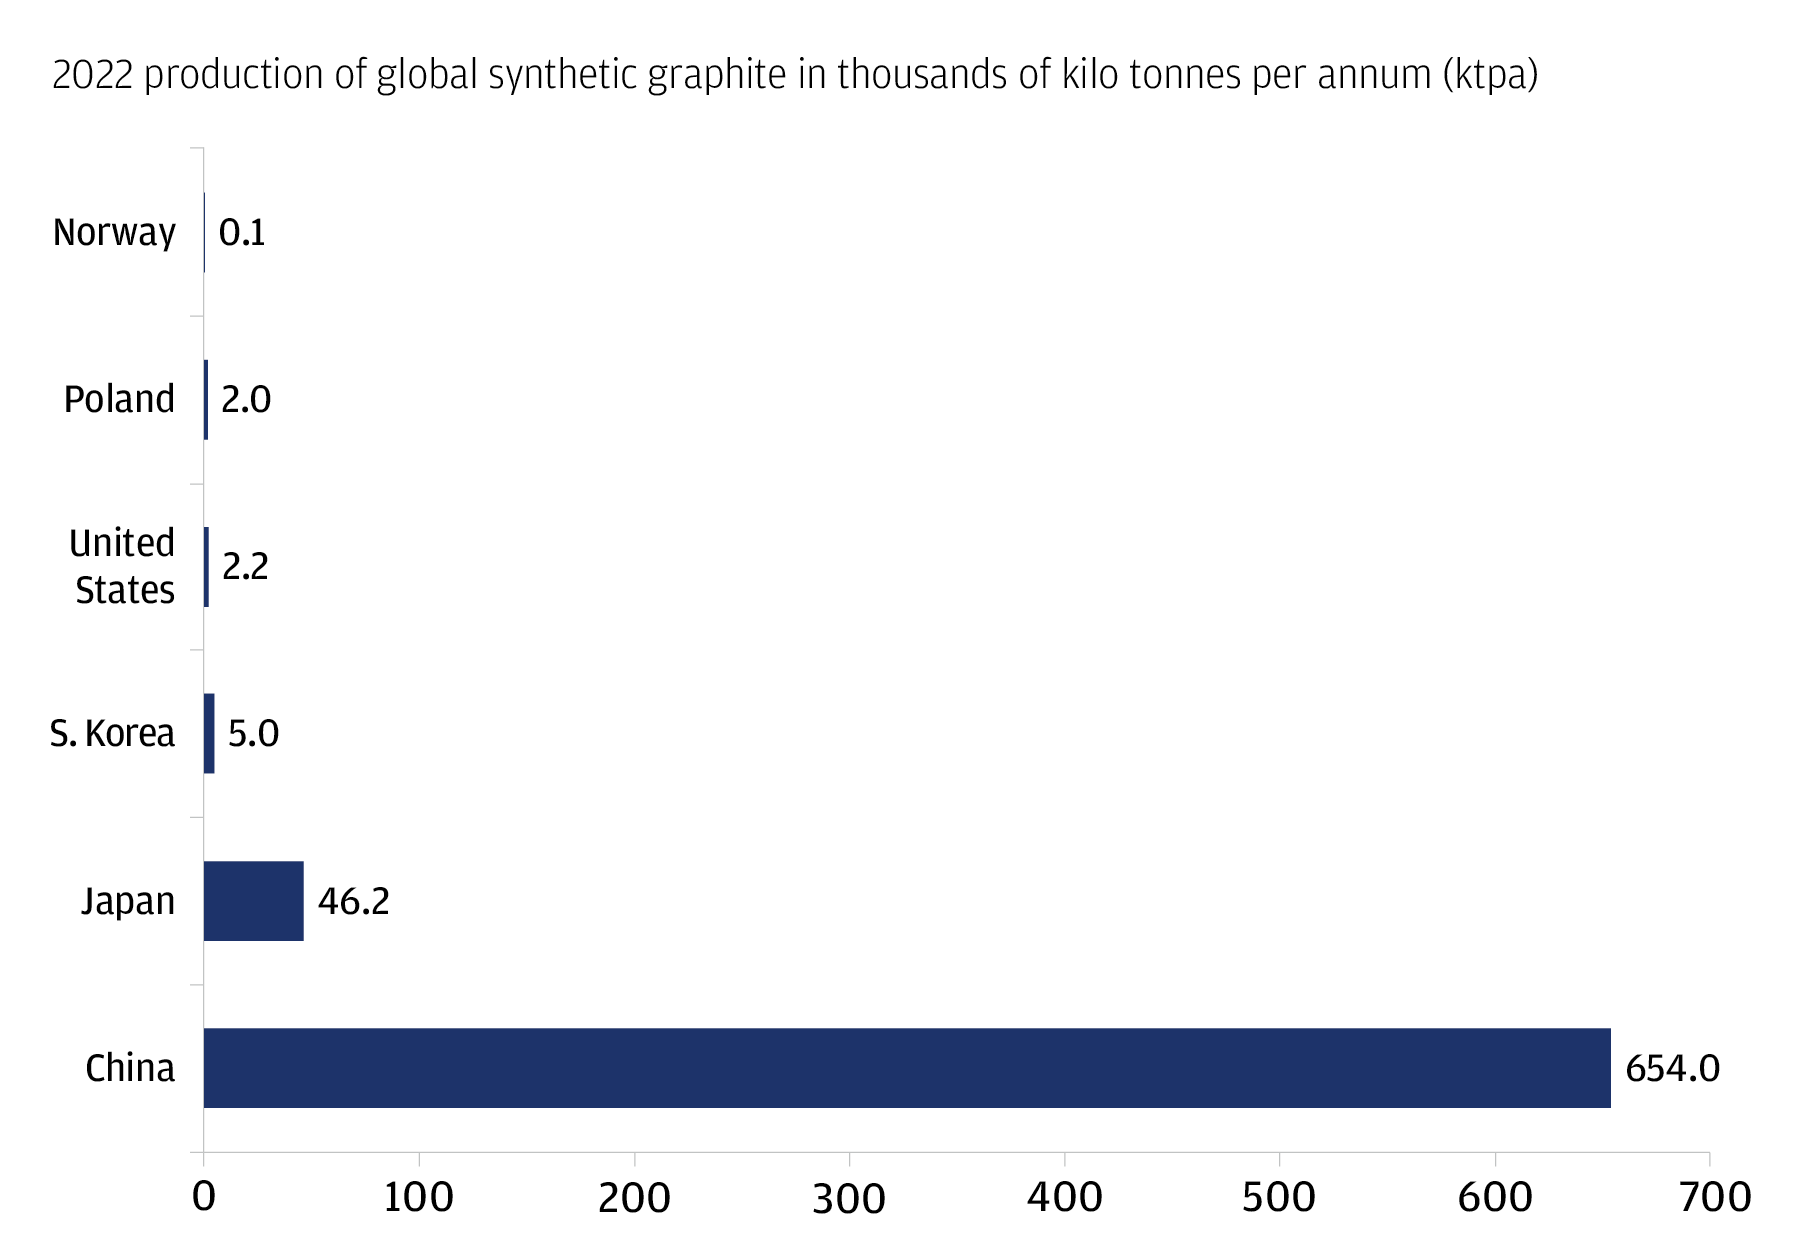 The chart is a bar chart that describes six countries’ 2022 production of global synthetic graphite in kilo tonnes per annum (ktpa).